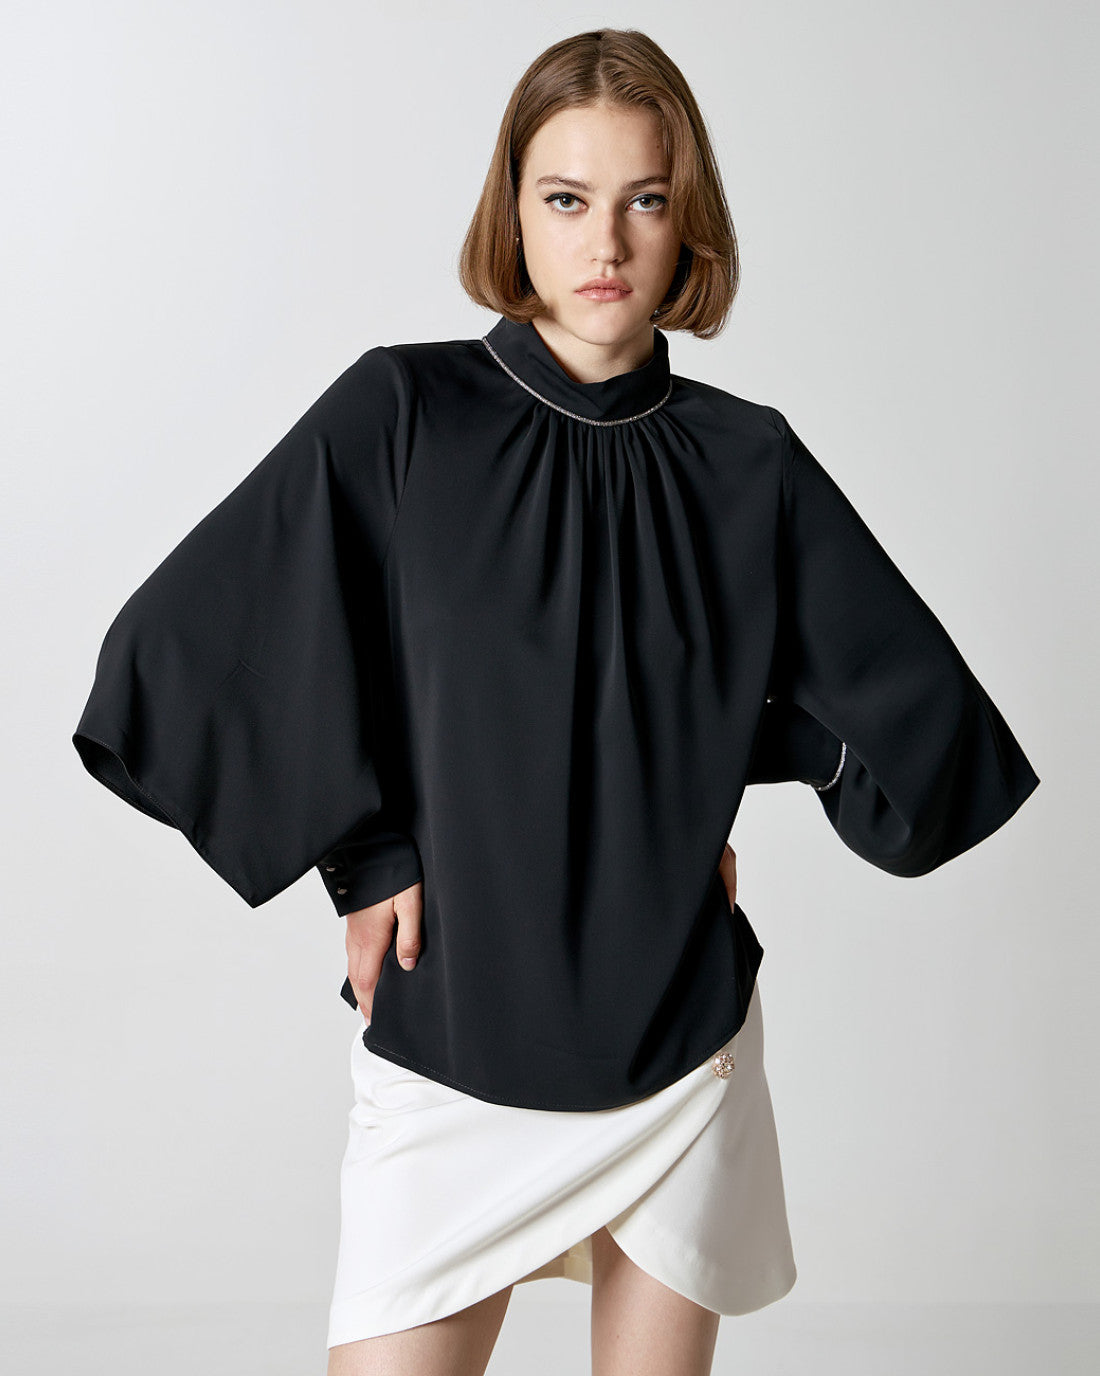 Blouse with rhinestones and sleeve openings - Black